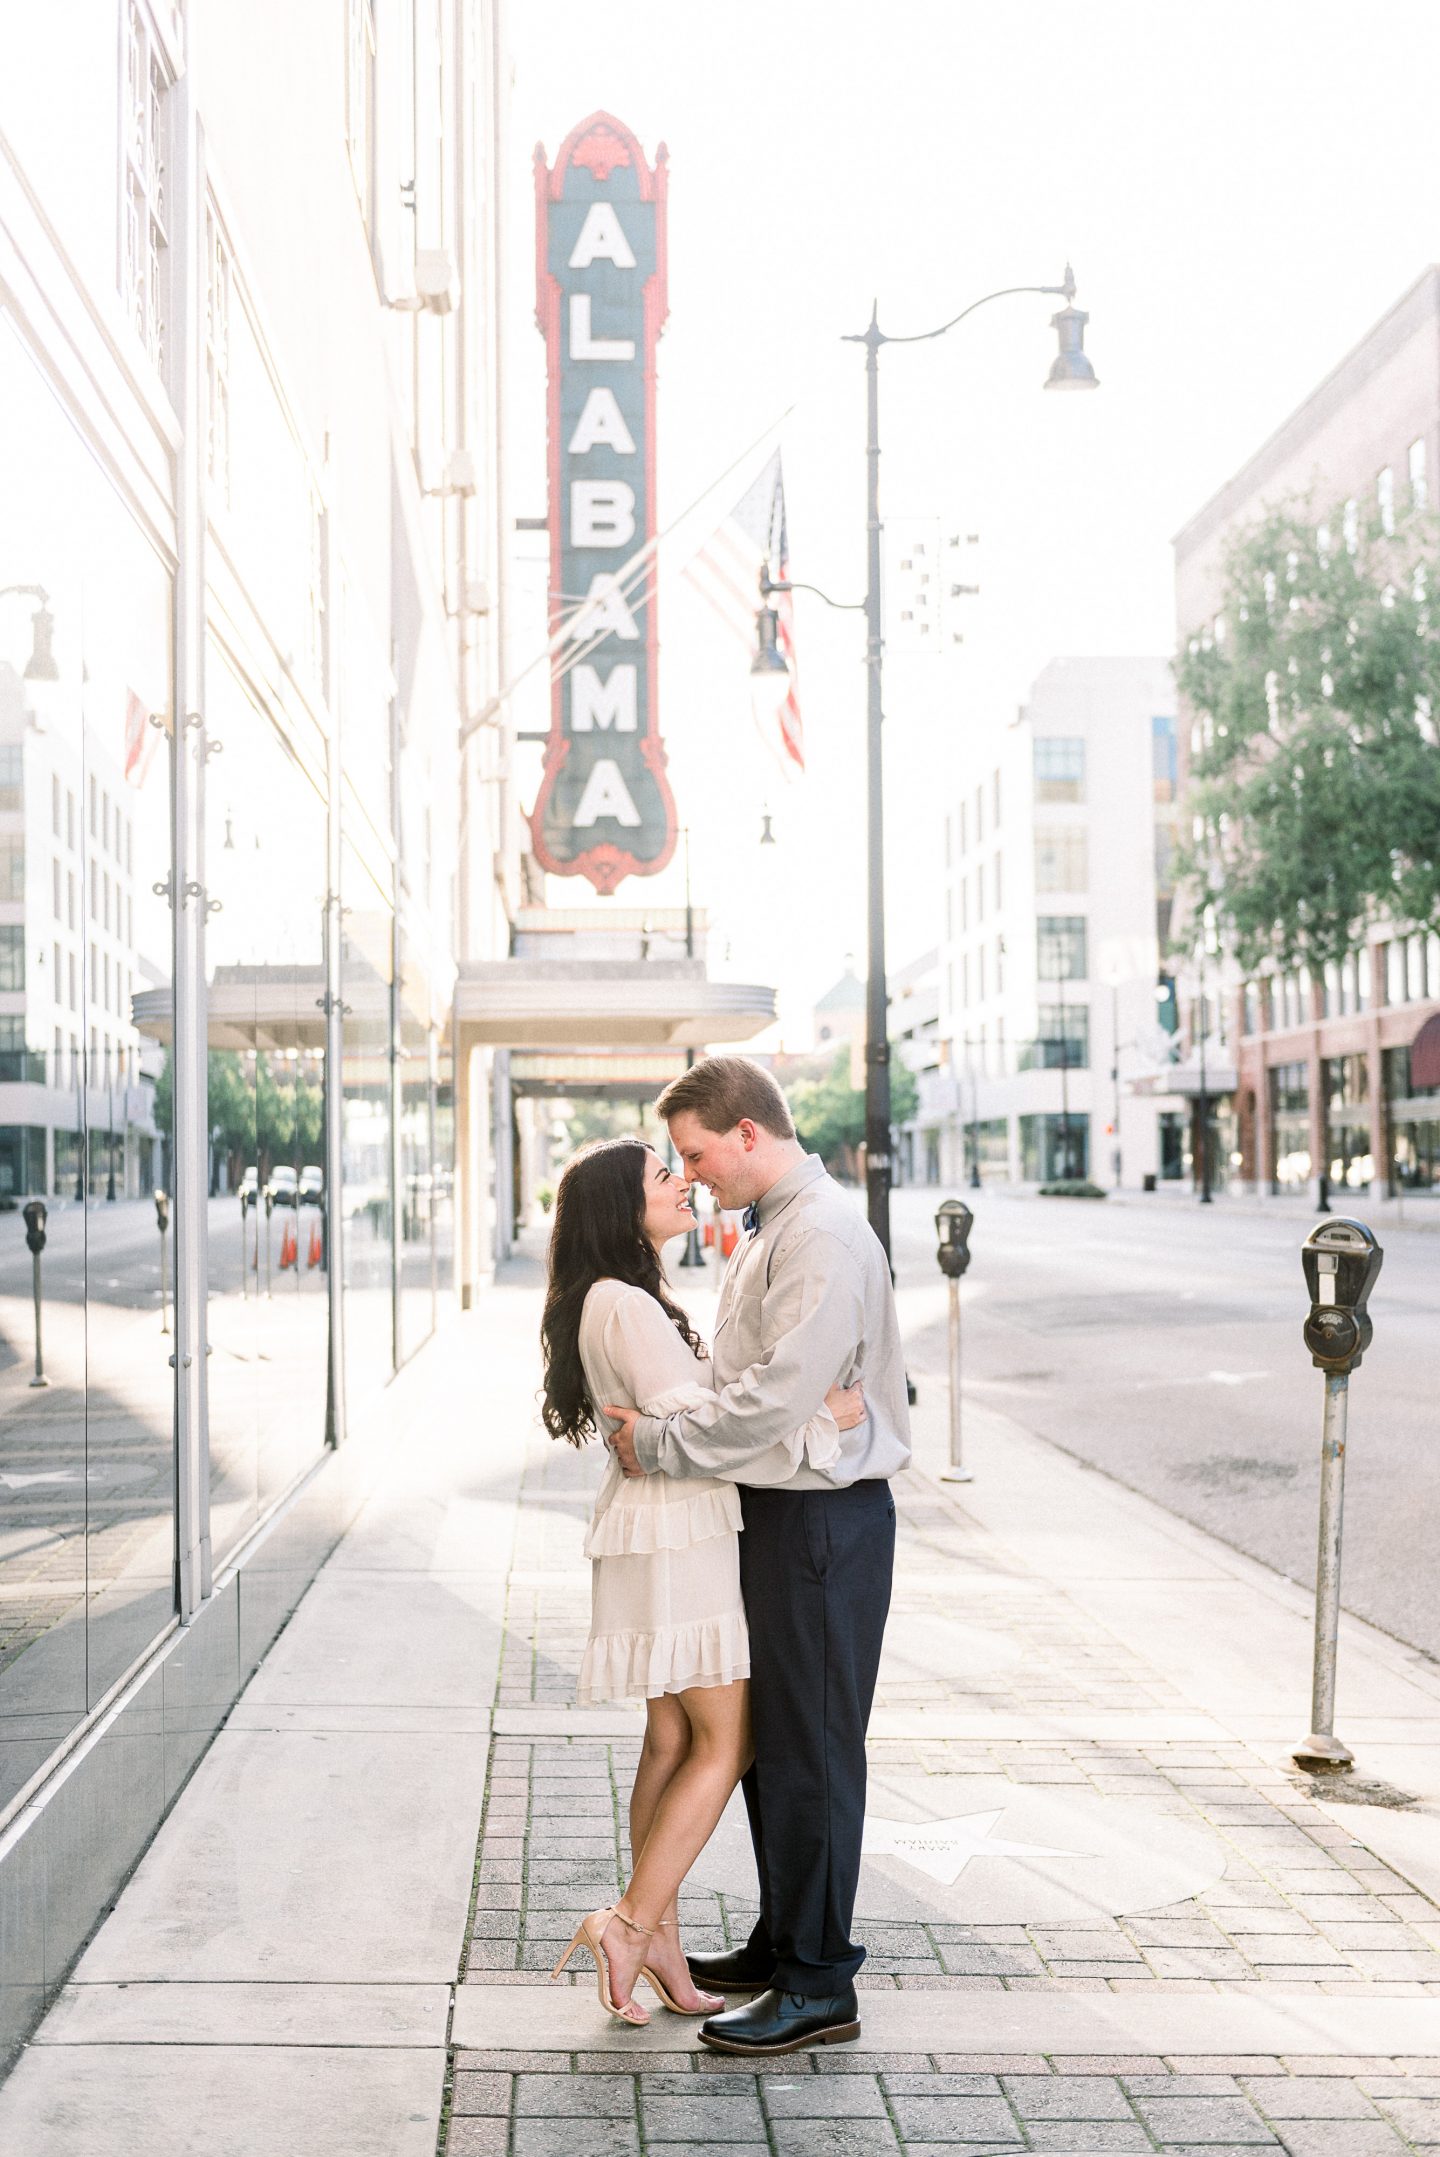 Our Downtown Birmingham Engagement Session with Eric & Jamie ...